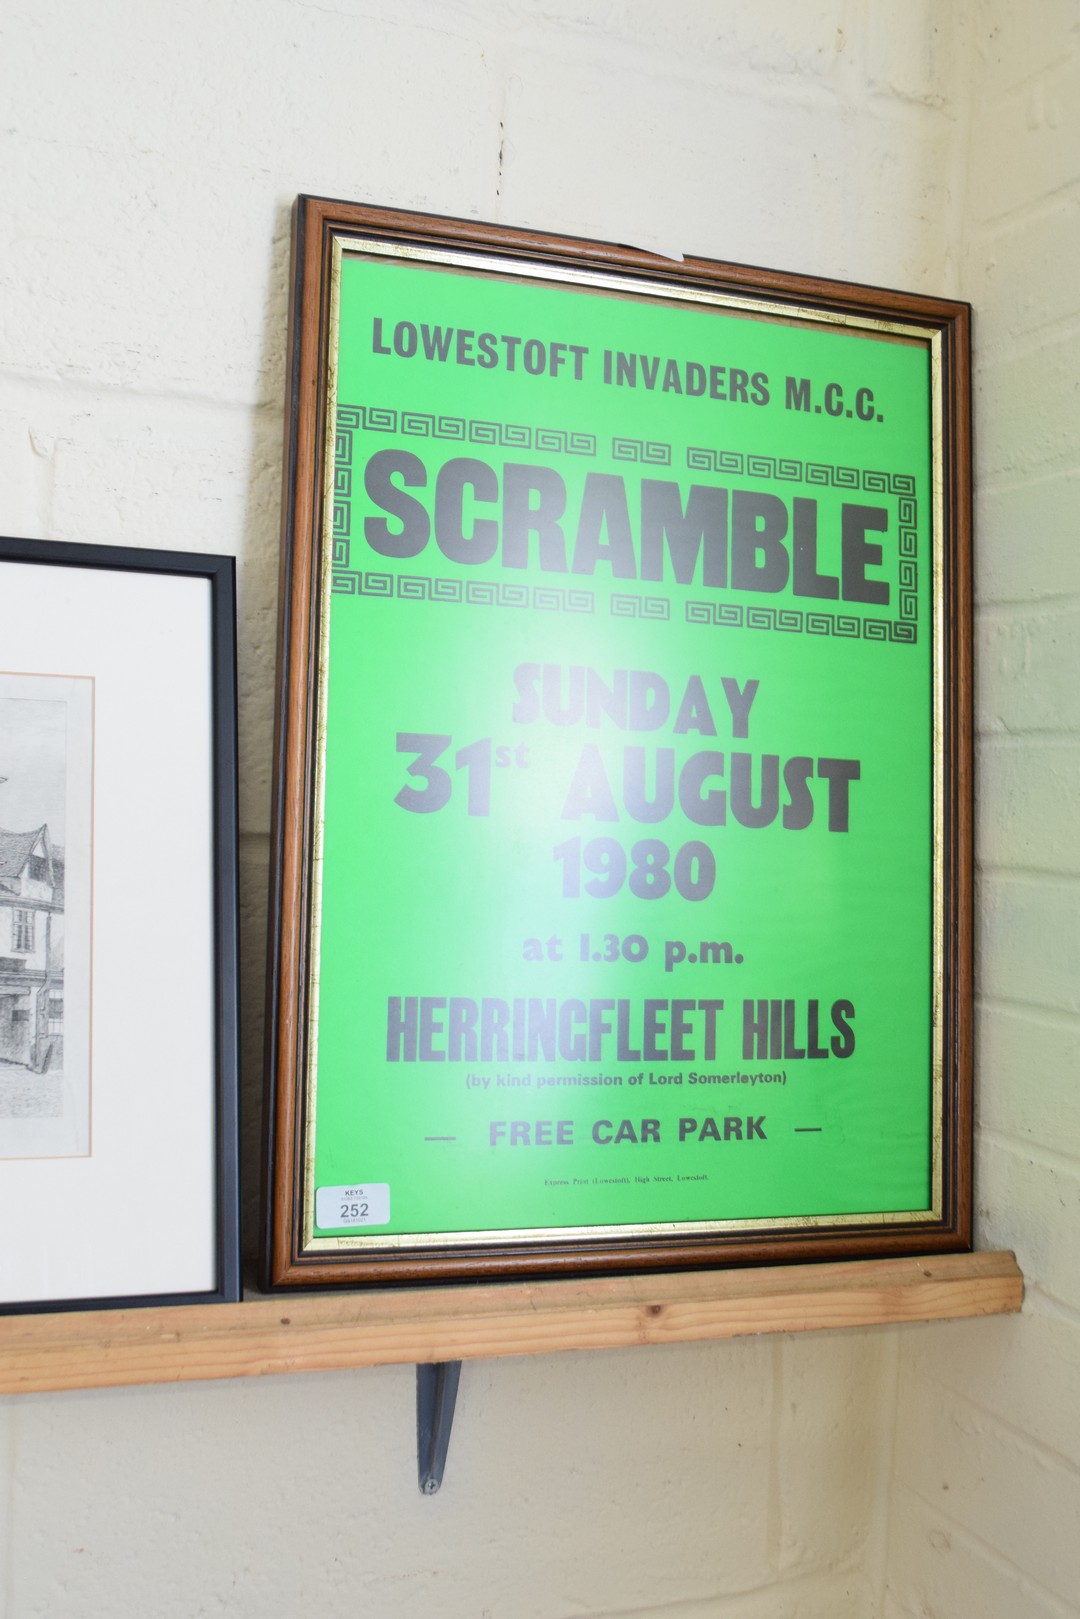 MOTORCYCLE INTEREST, ADVERTISING POSTER FOR LOWESTOFT INVADERS SCRAMBLE SUNDAY 31 AUGUST 1980 AT